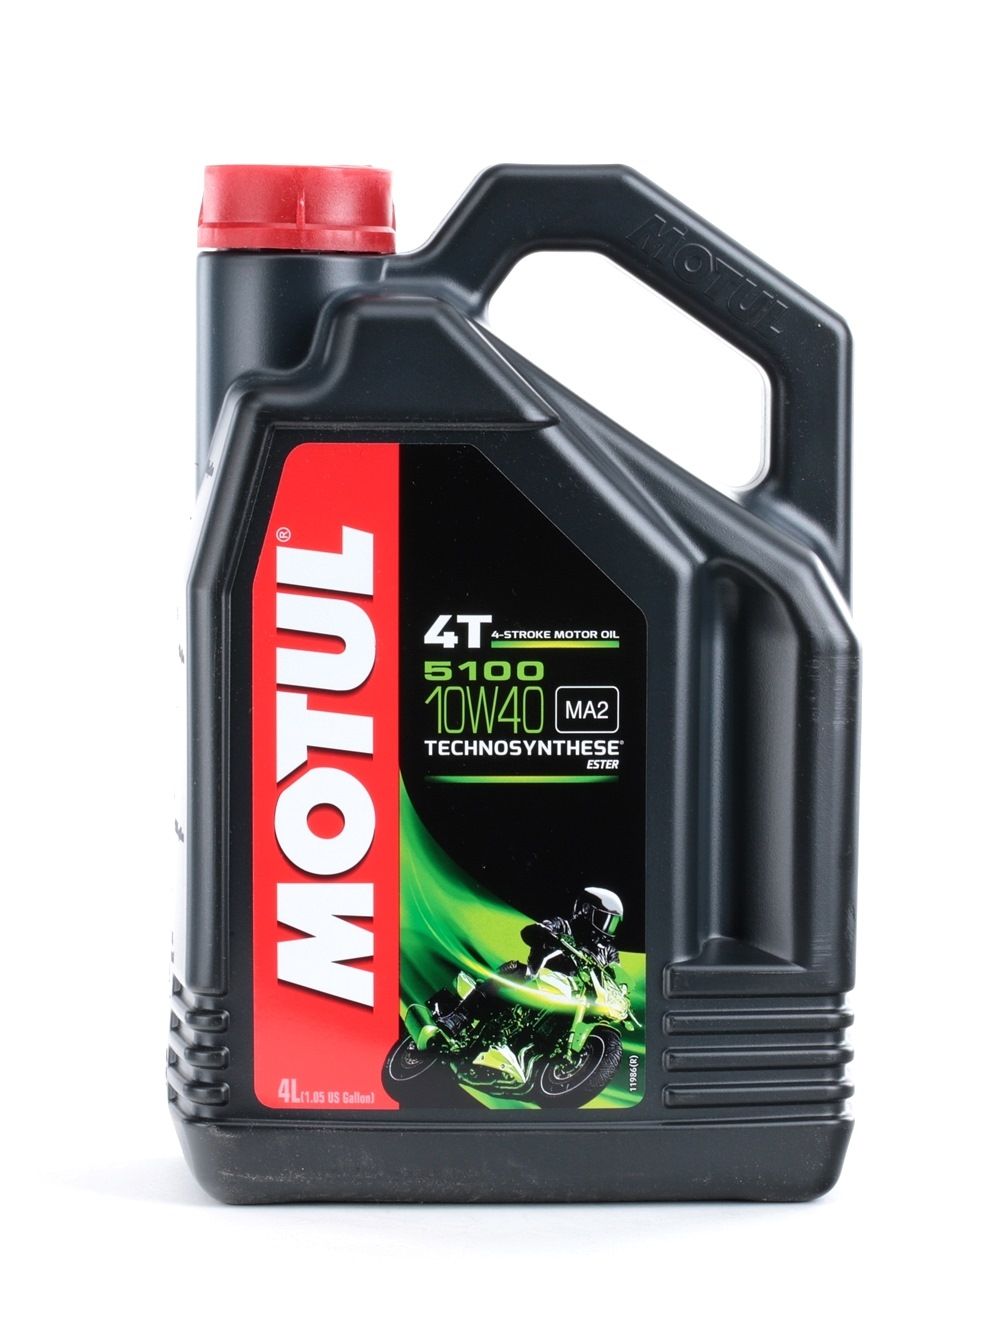 Maxi scooters Moped bike Motorcycle Engine Oil 104068